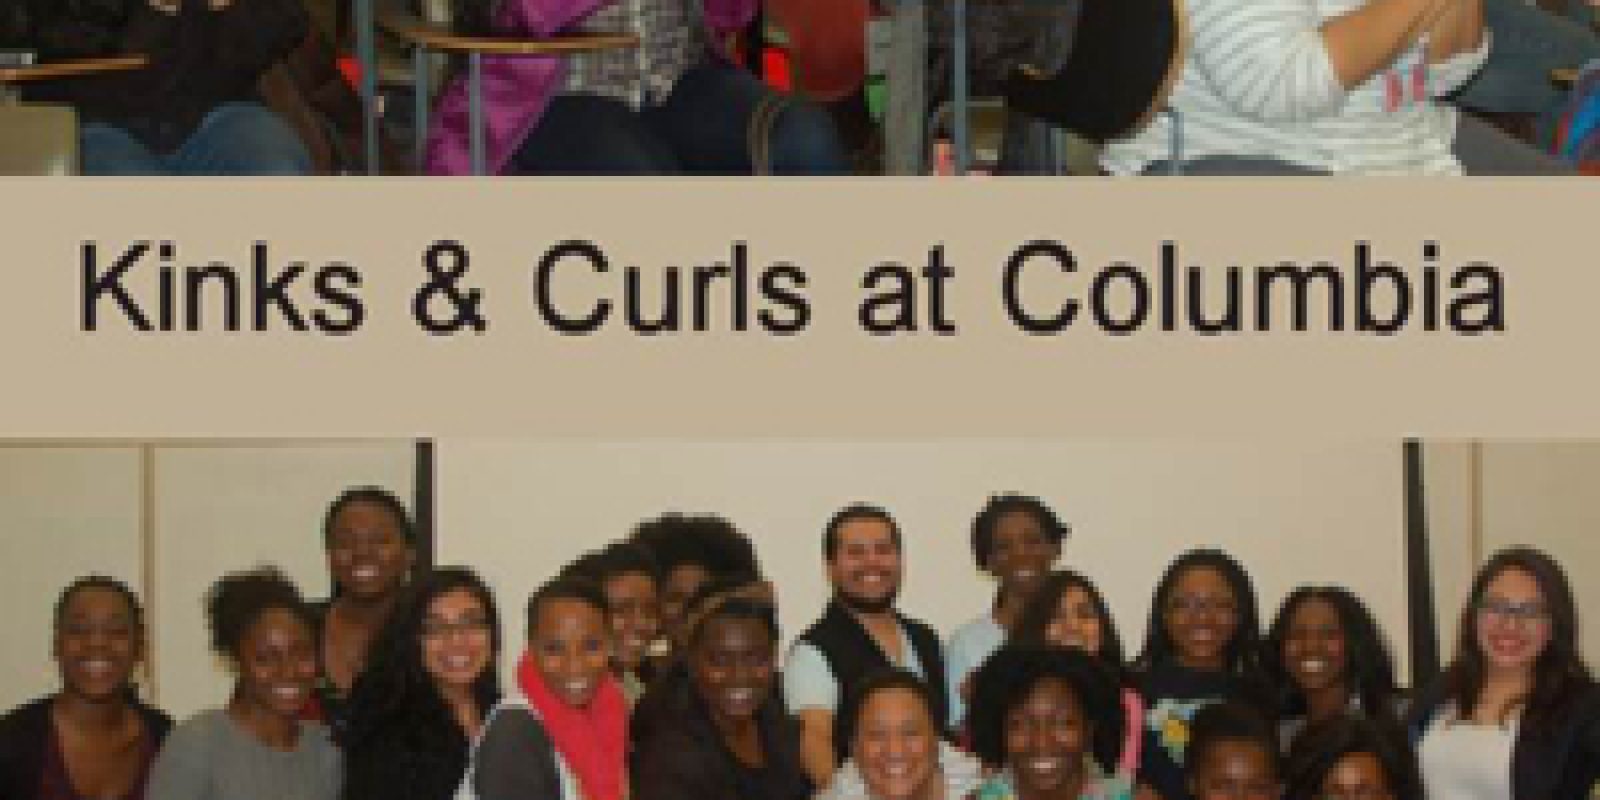 Kinks and Curls at Columbia